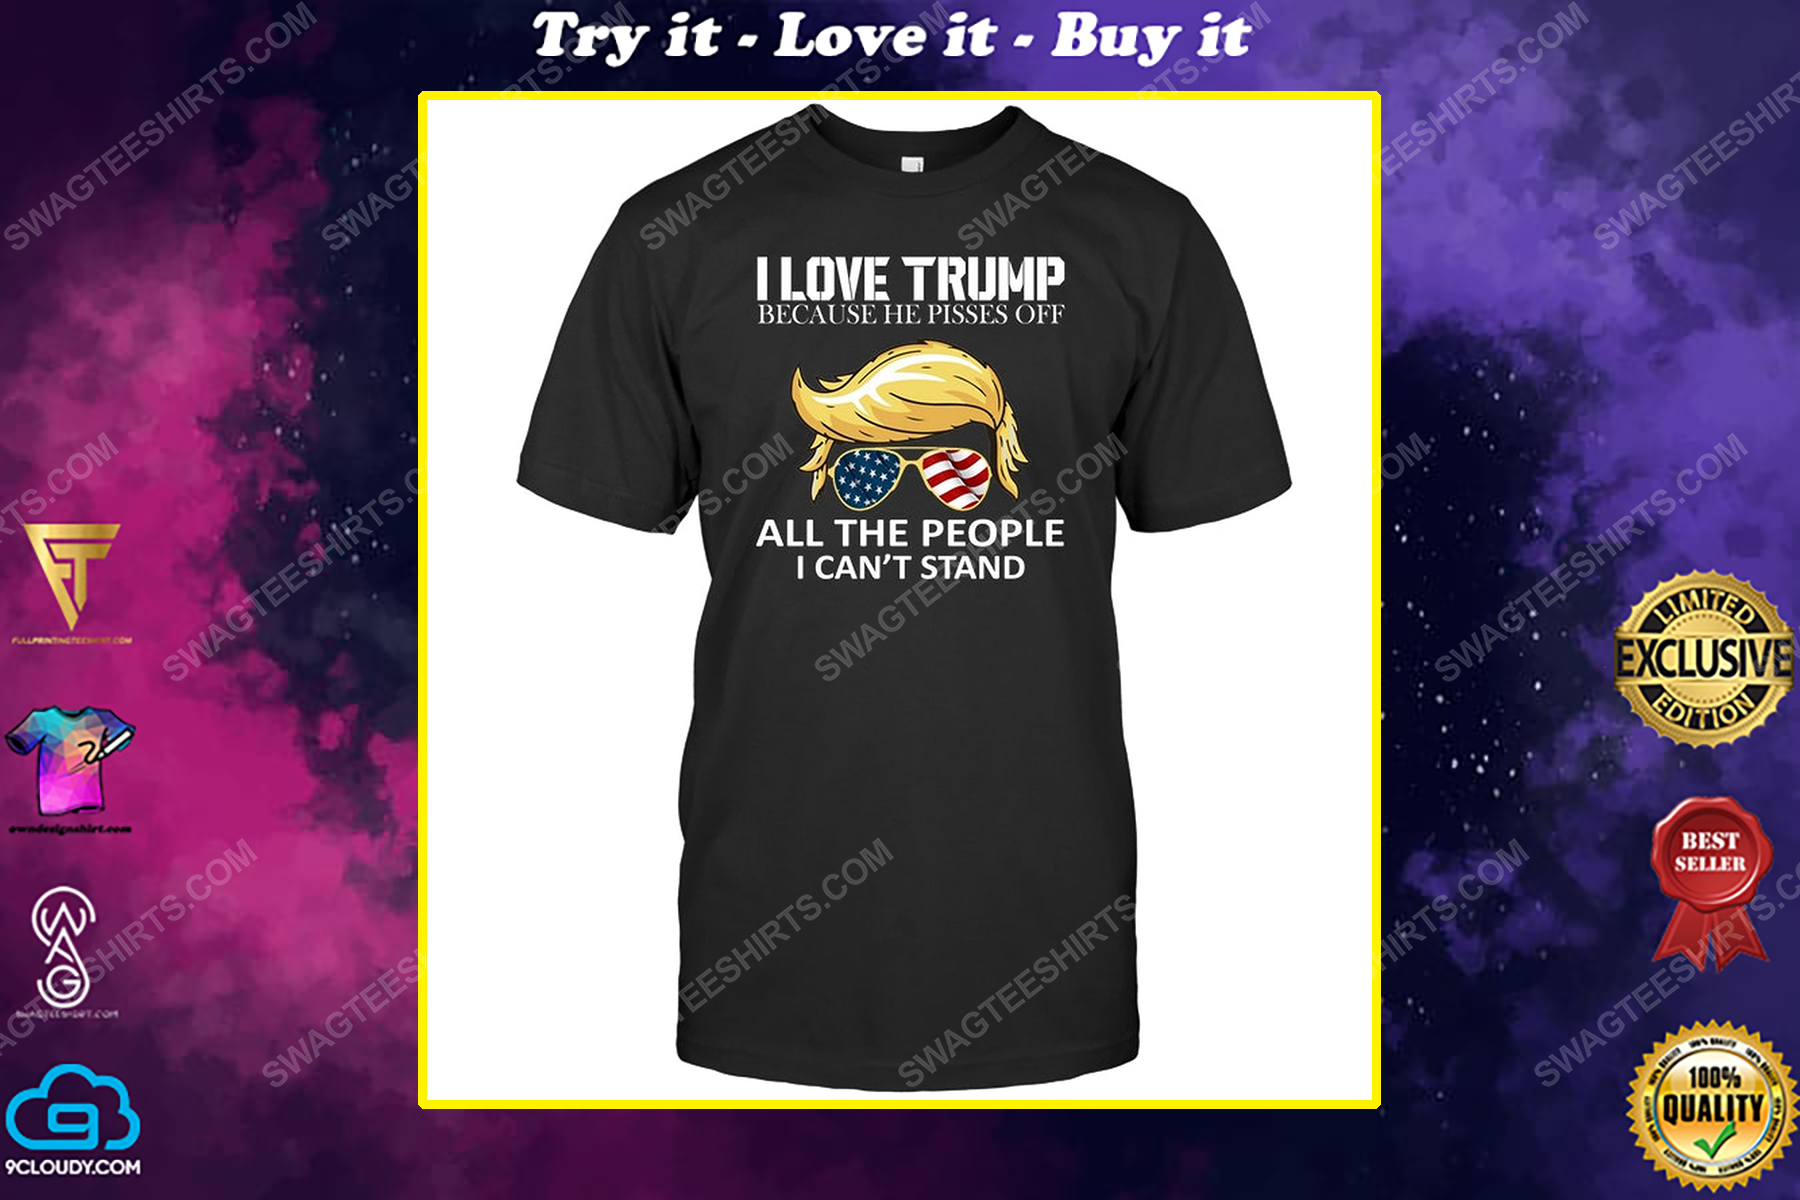 I love trump because he pisses off all the people i can't stand political shirt